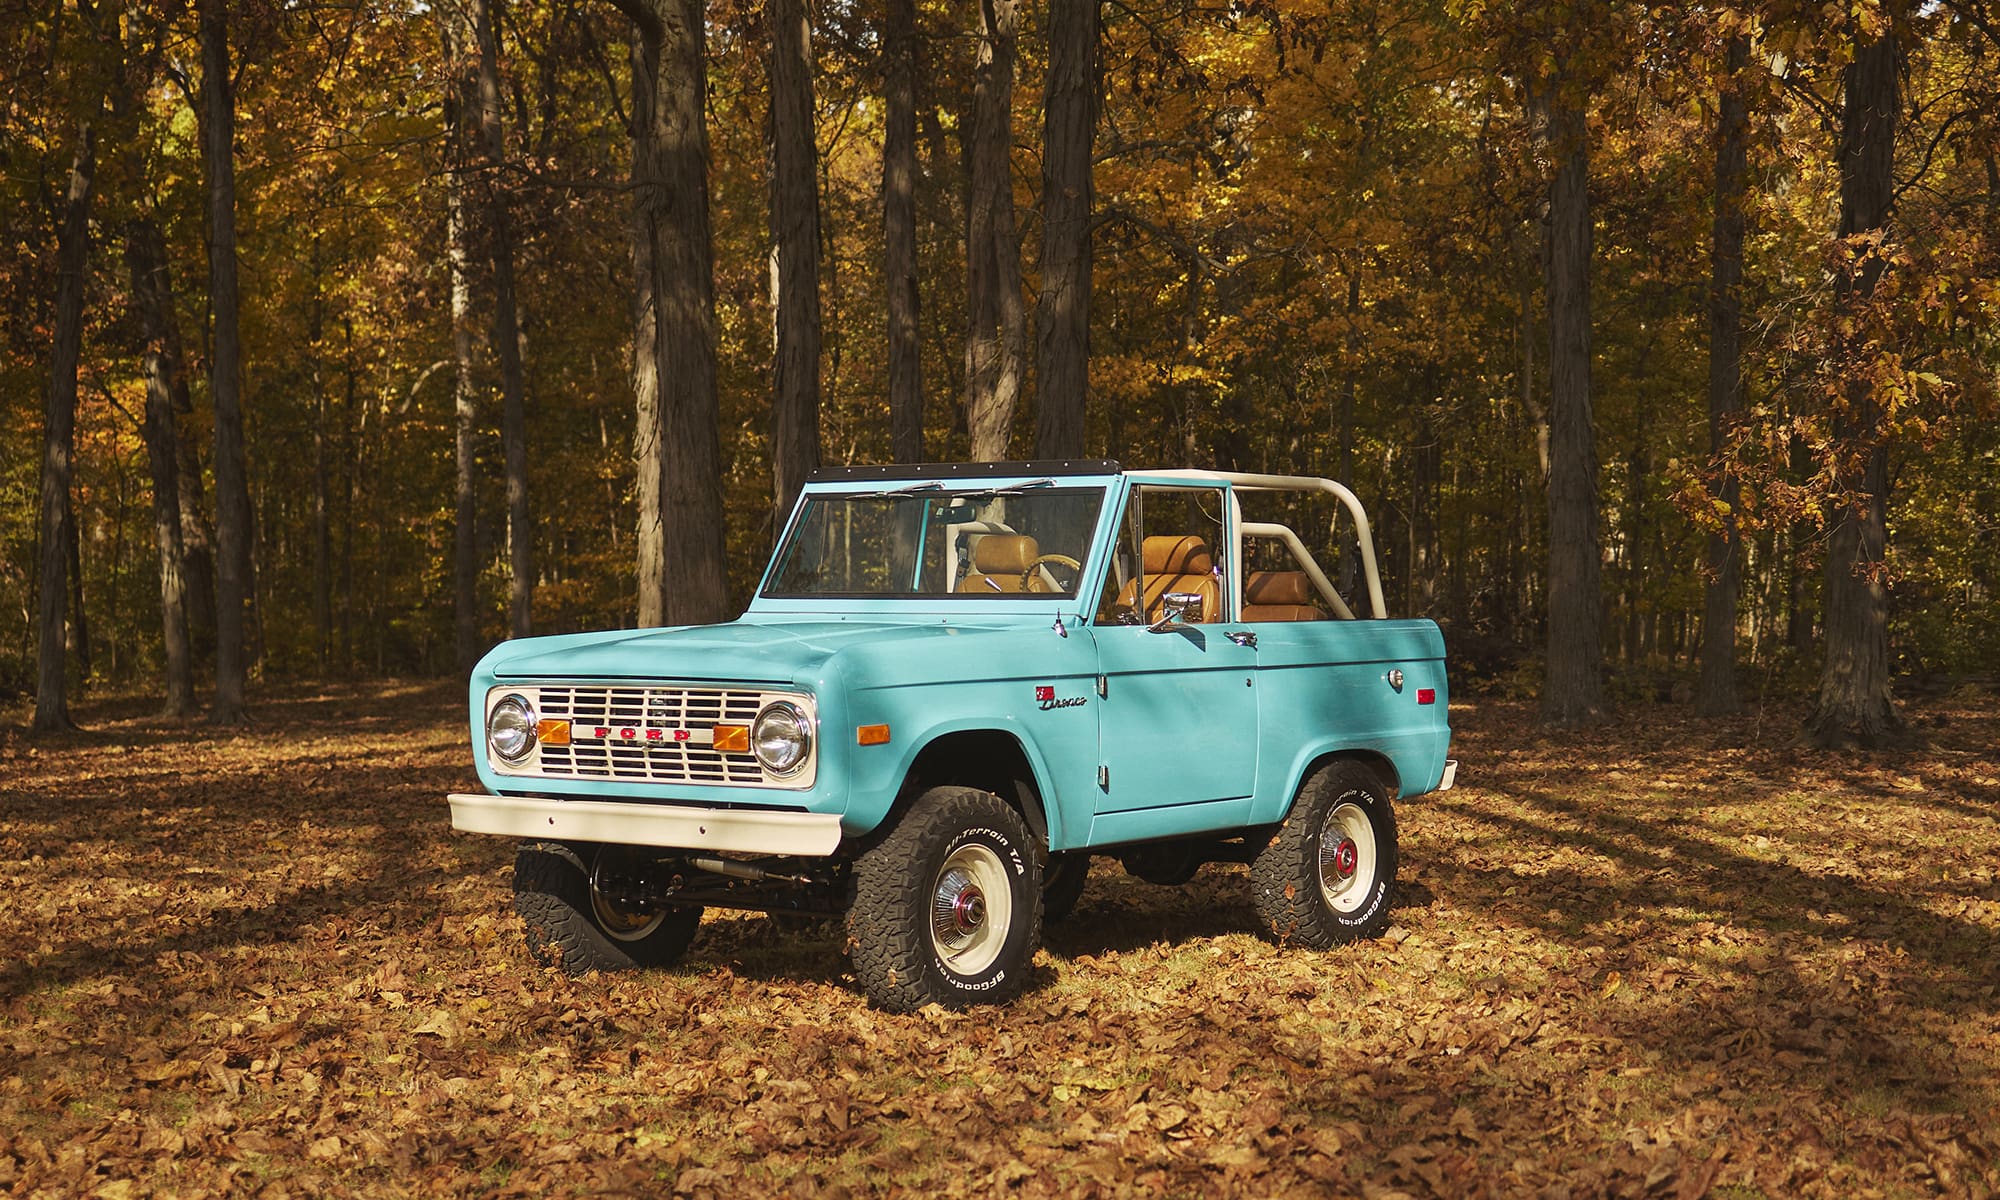 1970-heritage-blue-classic-ford-bronco-302-series-woods